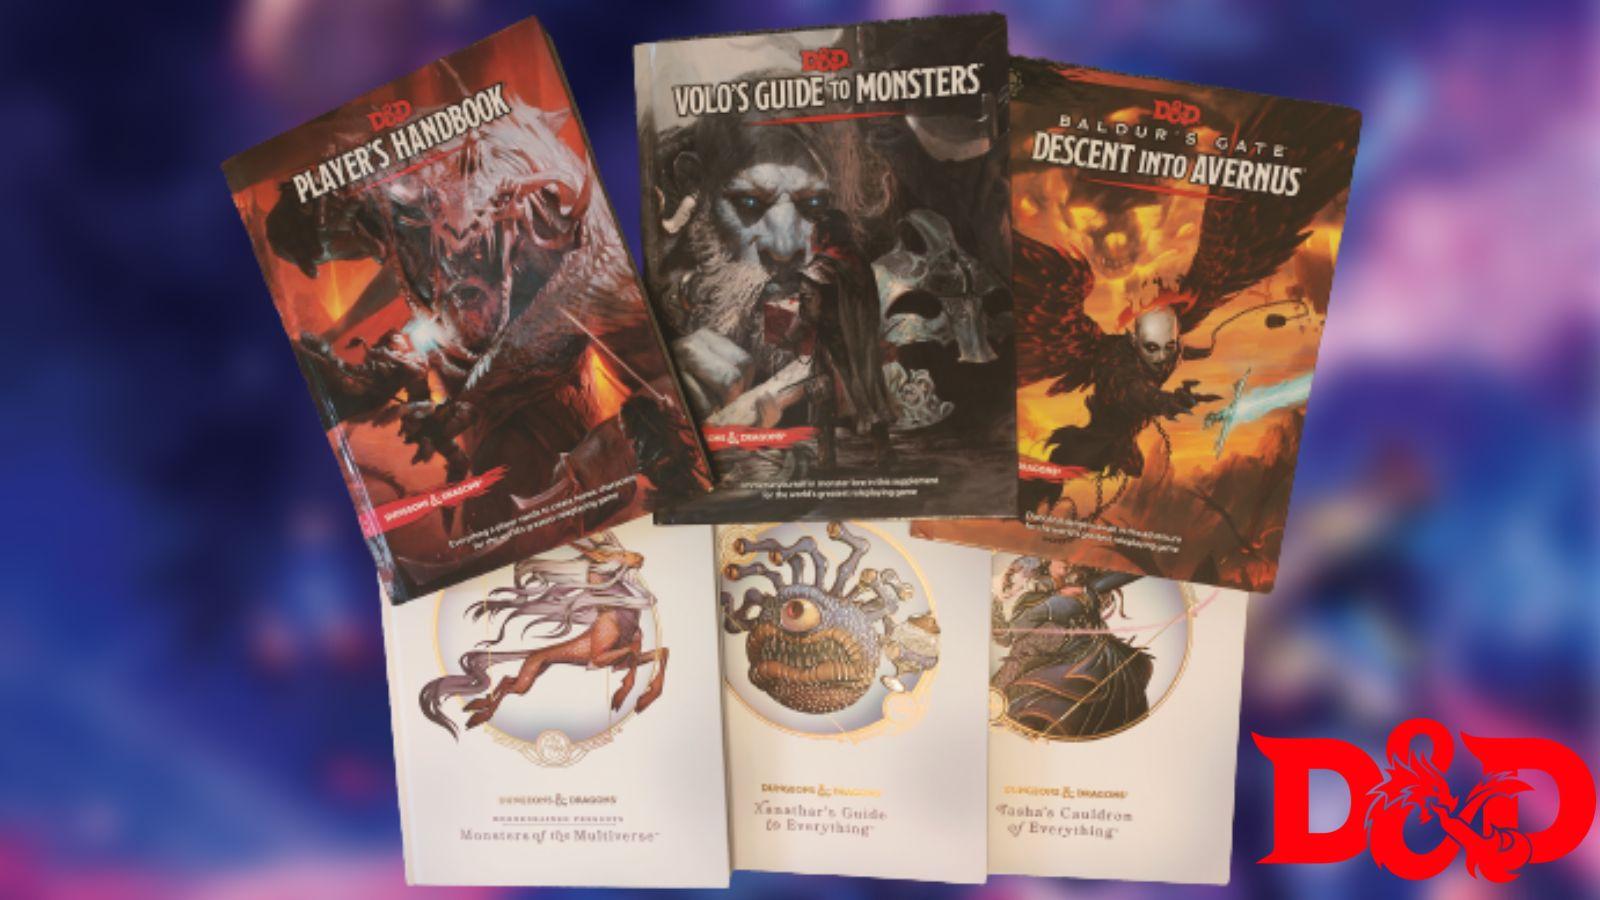 Showing a collection of Dungeons and Dragons 5e books